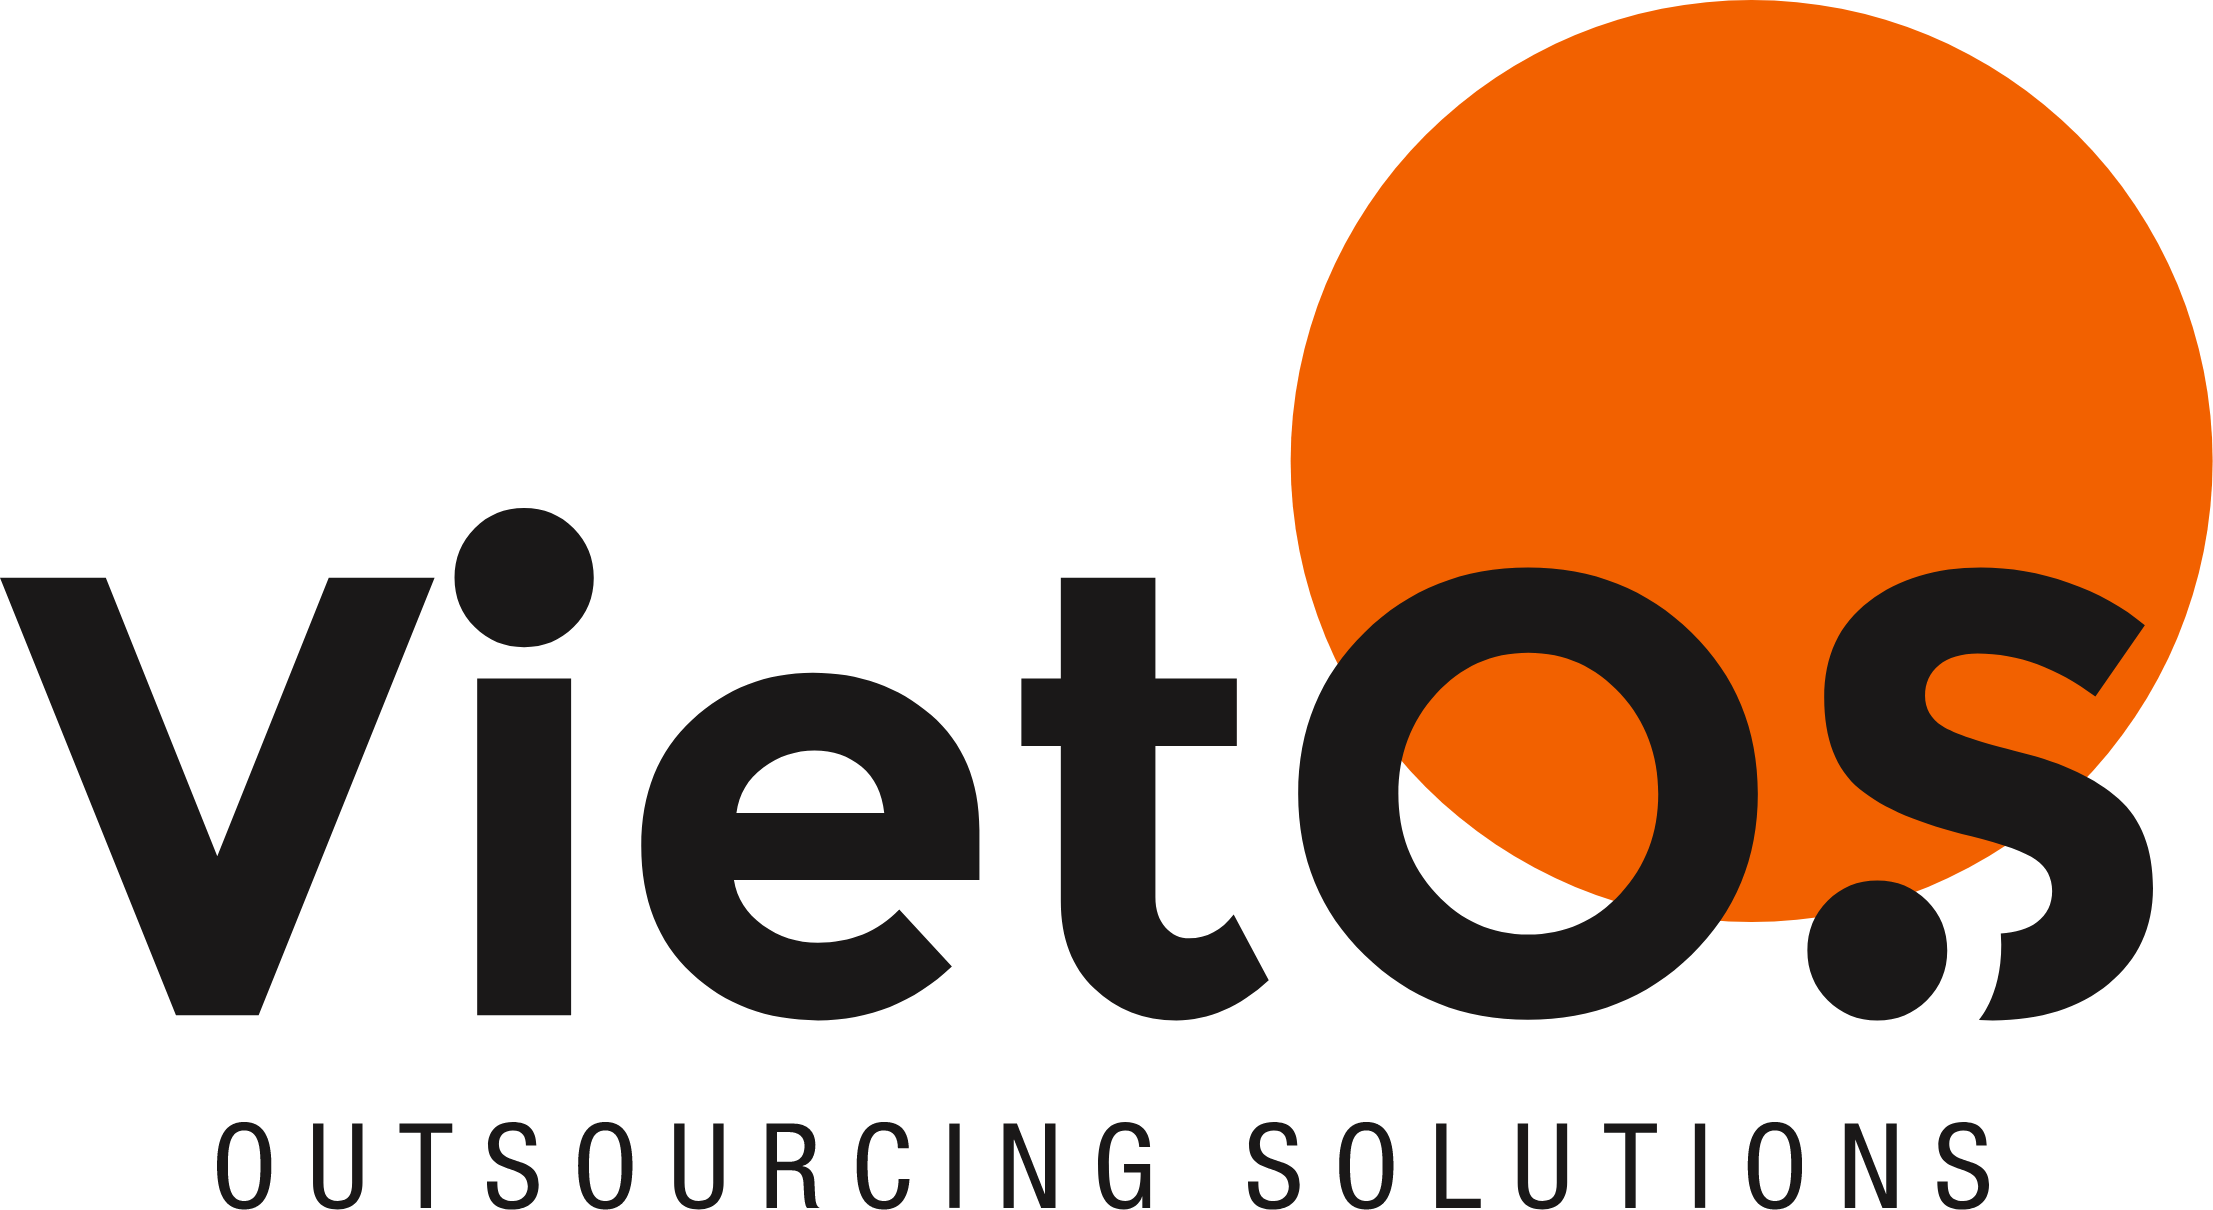 VietOS OUTSOURCING SOLUTIONS